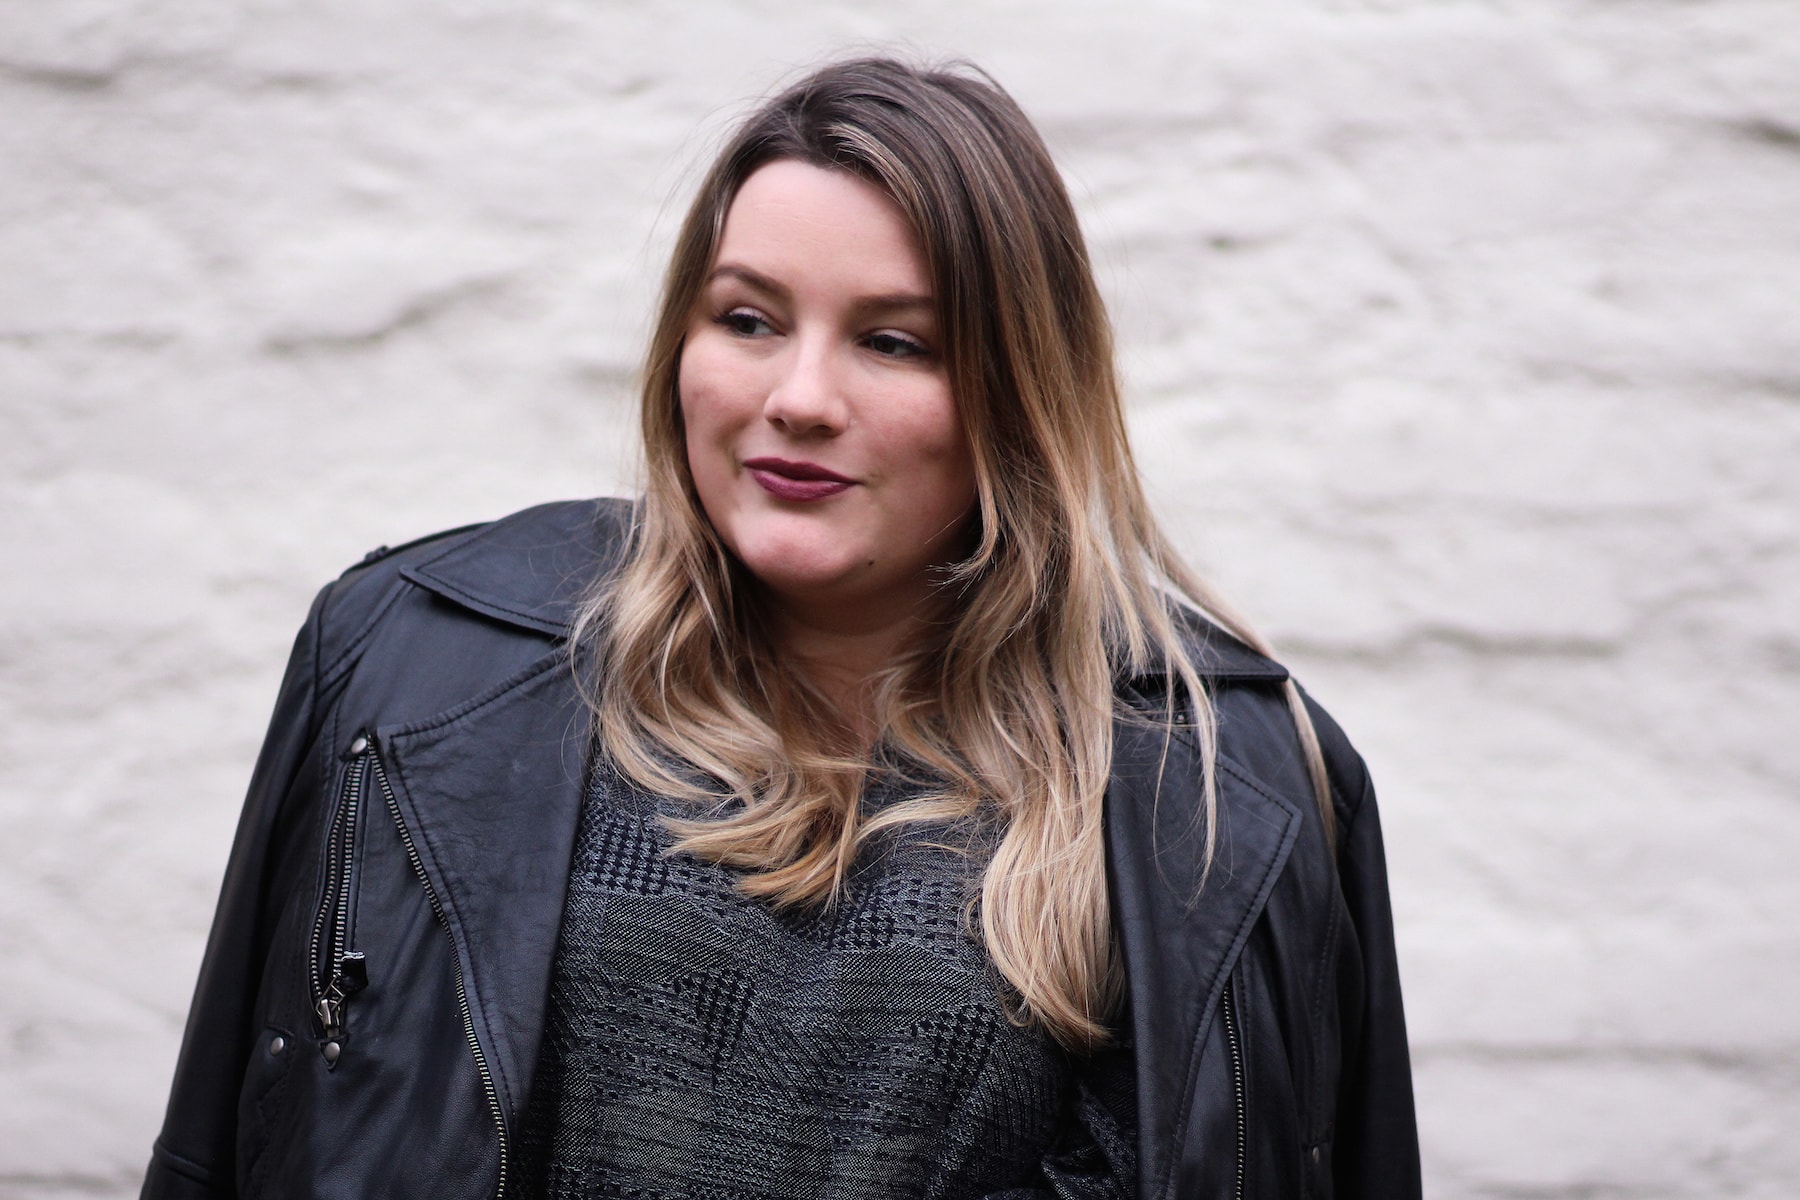 “Rock Chic” Plus Size Outfit – Verlosung